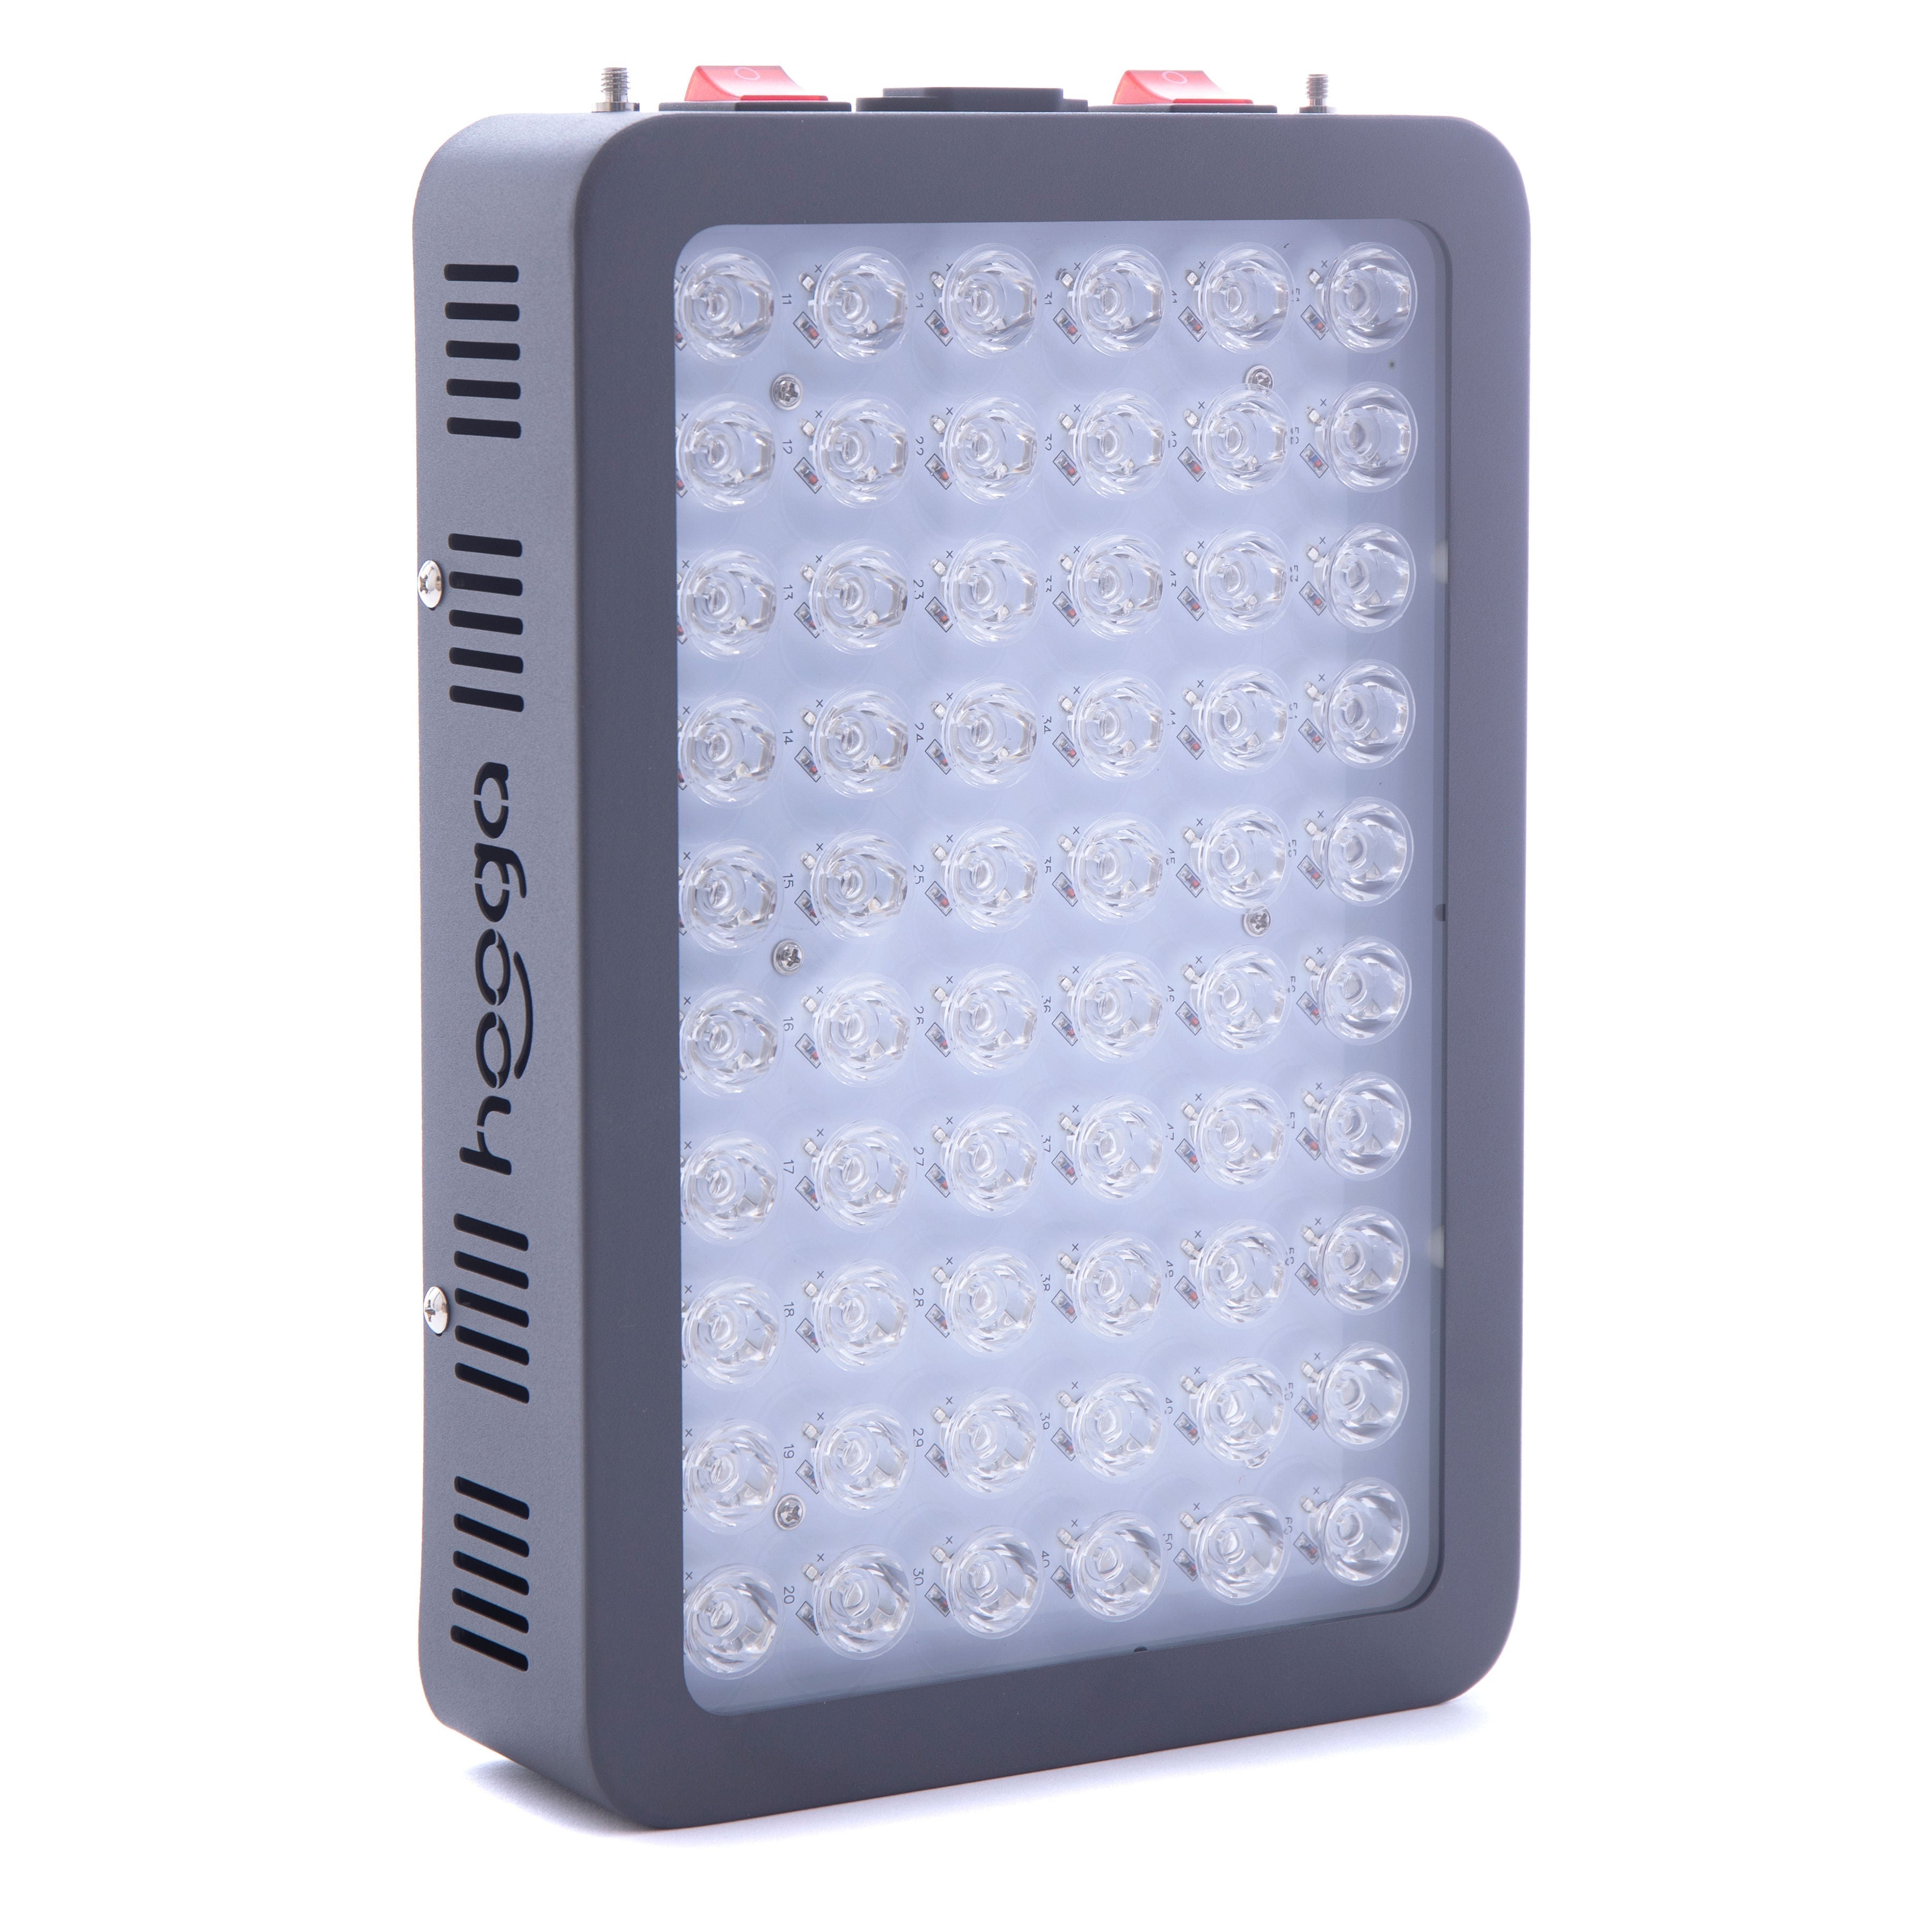 Hooga HG300 Small Red Light Therapy Portable Panel For Face and Body